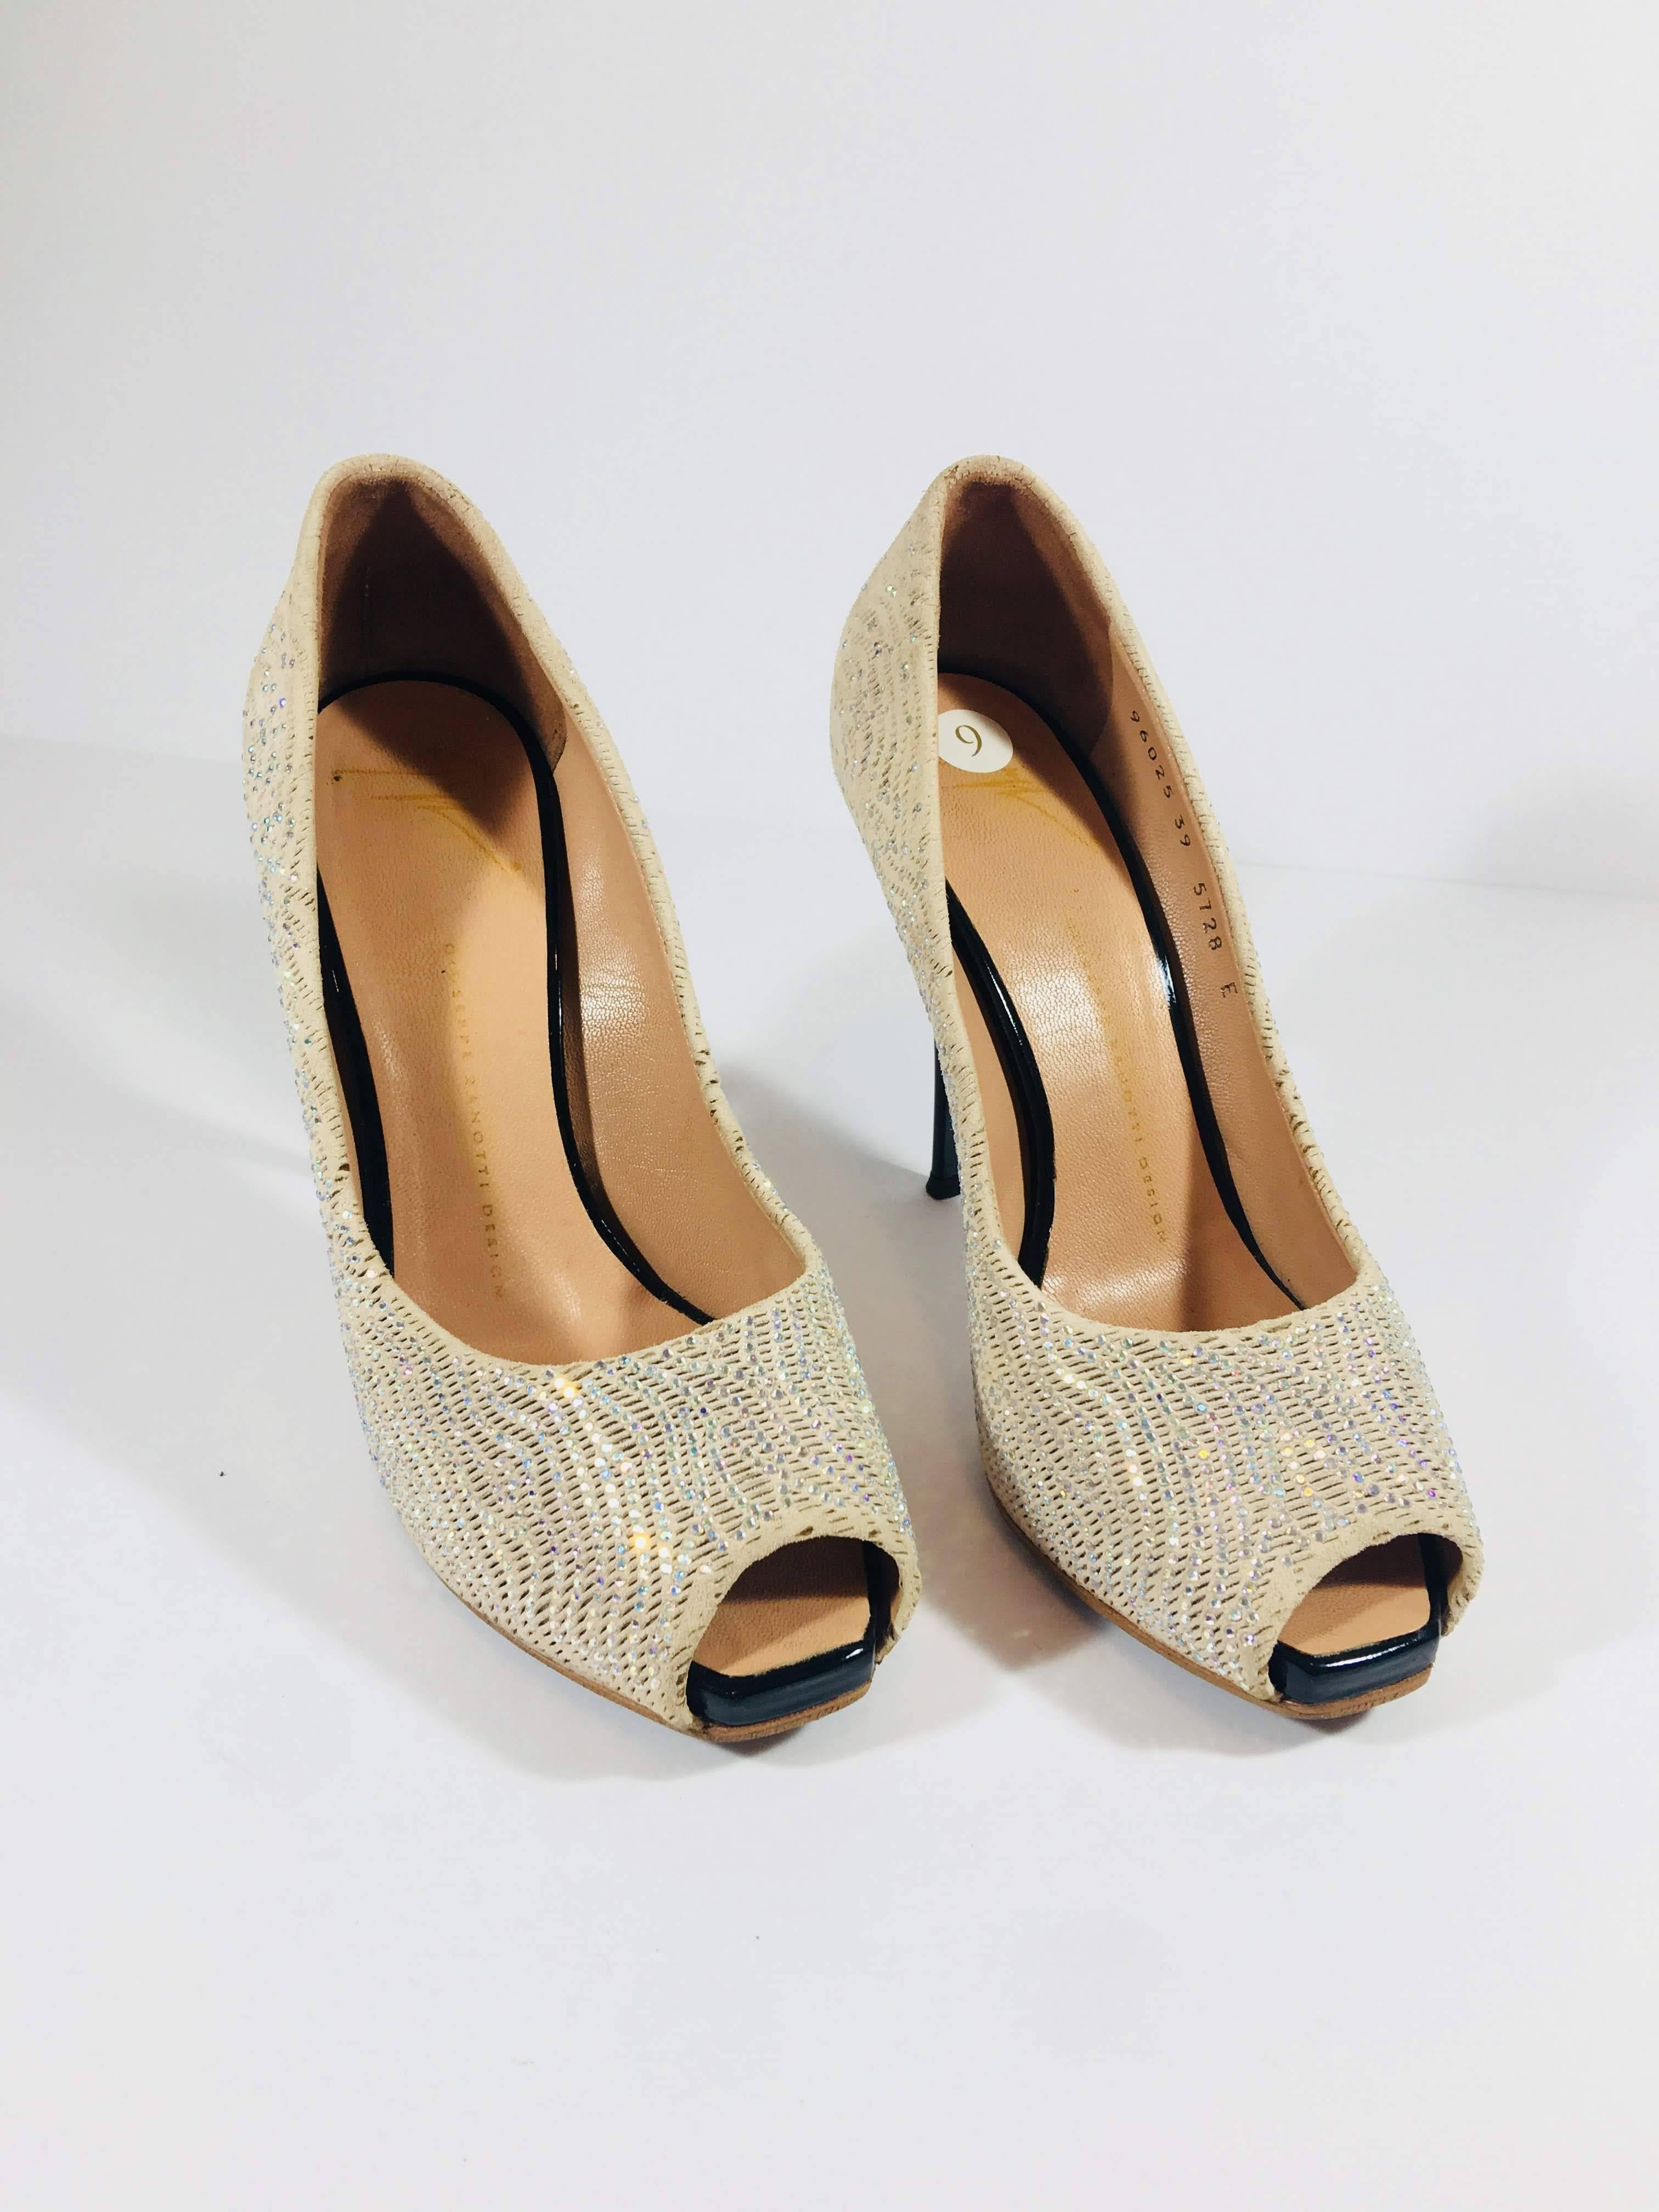 Guiseppe Zanotti Pumps in Nude Suede. Peep Toe with Embellished Details Throughout. 